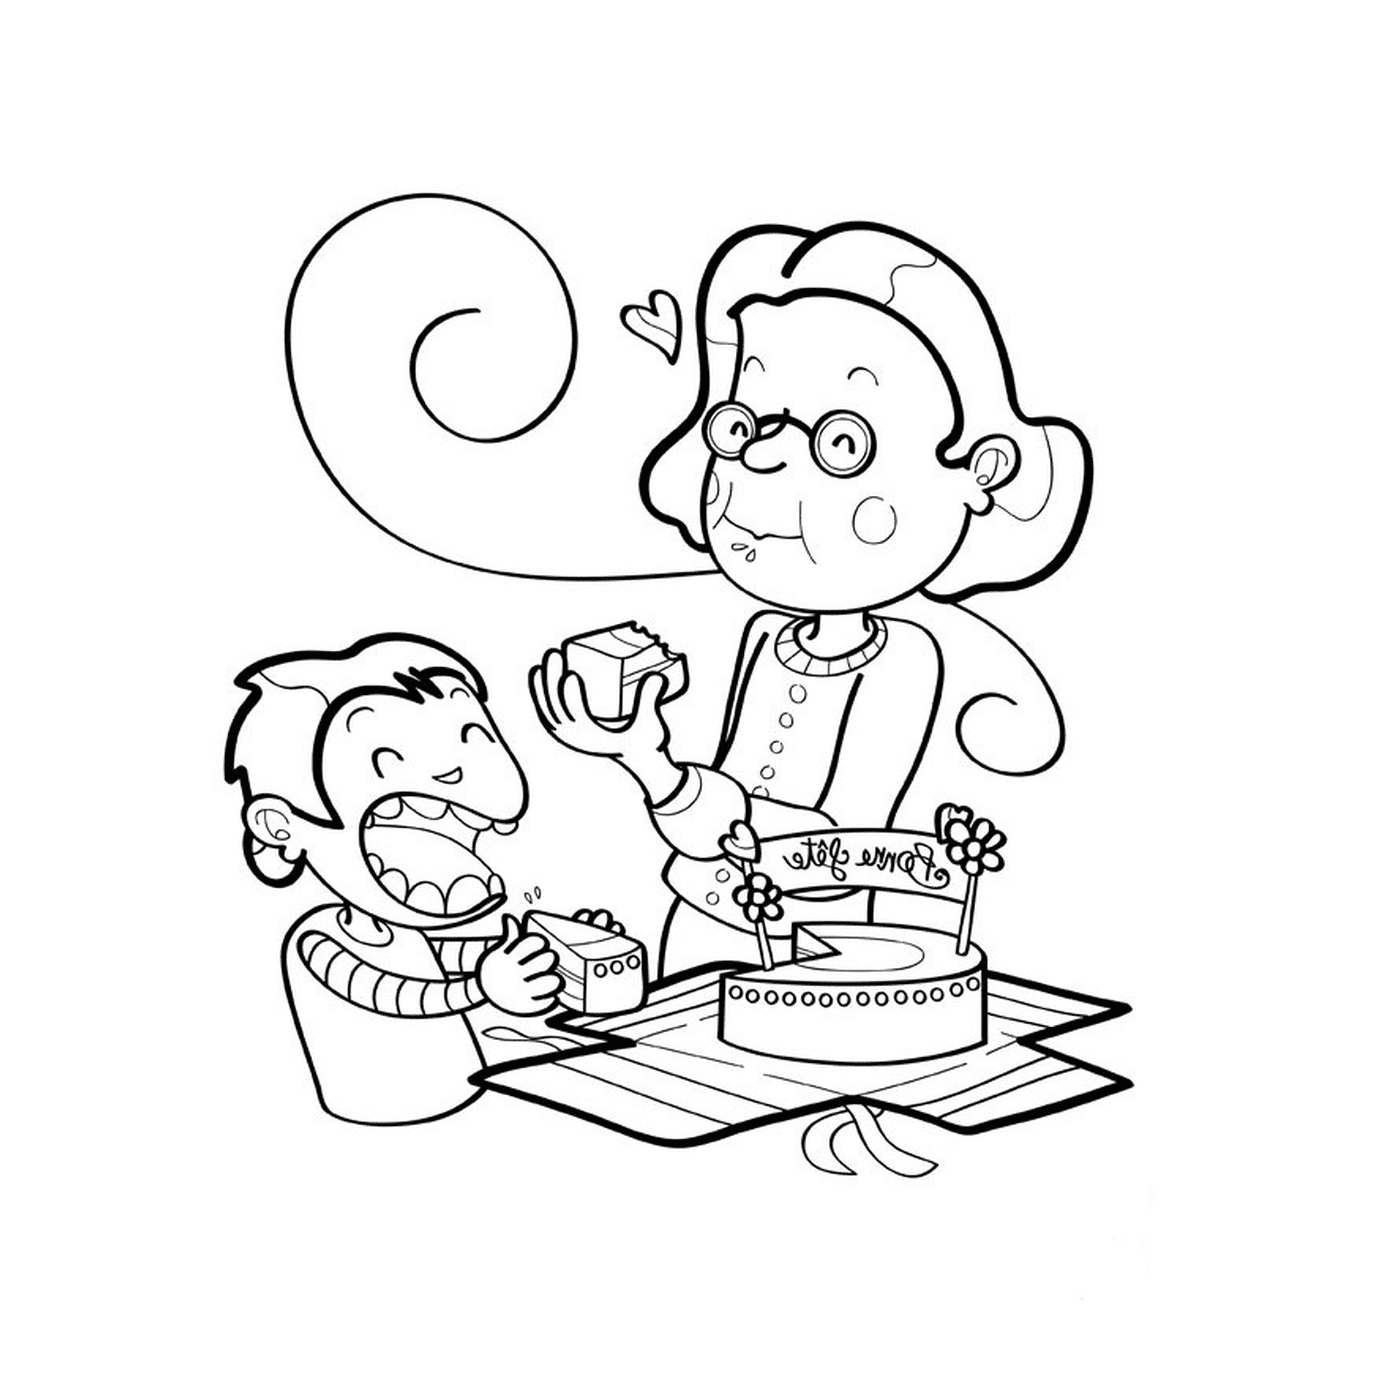  An old woman and a monkey eating cake 